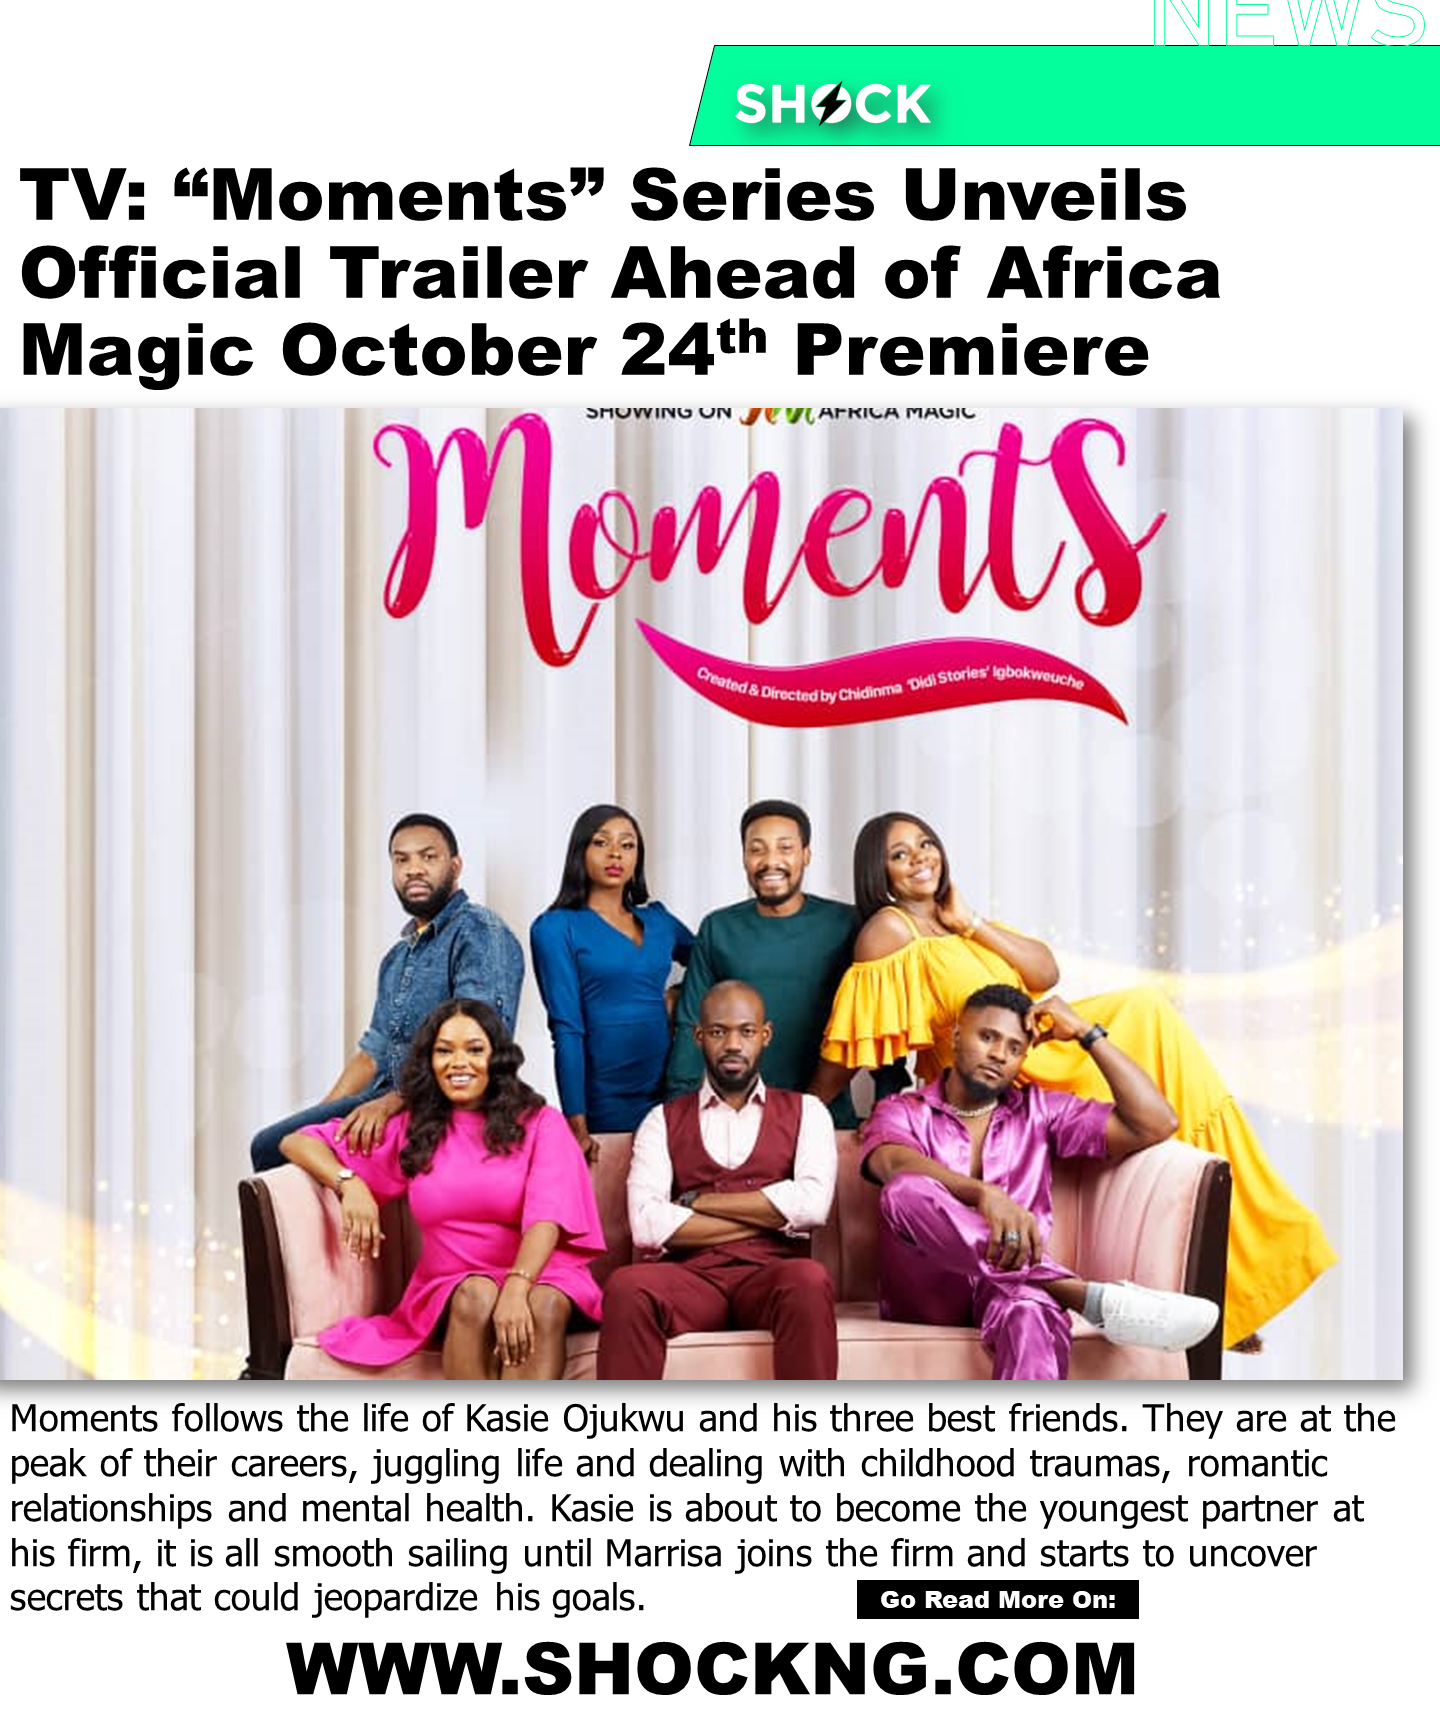 Moments series launch post - “Moments” Series Unveils Official Trailer Ahead of Africa Magic October 24th Premiere